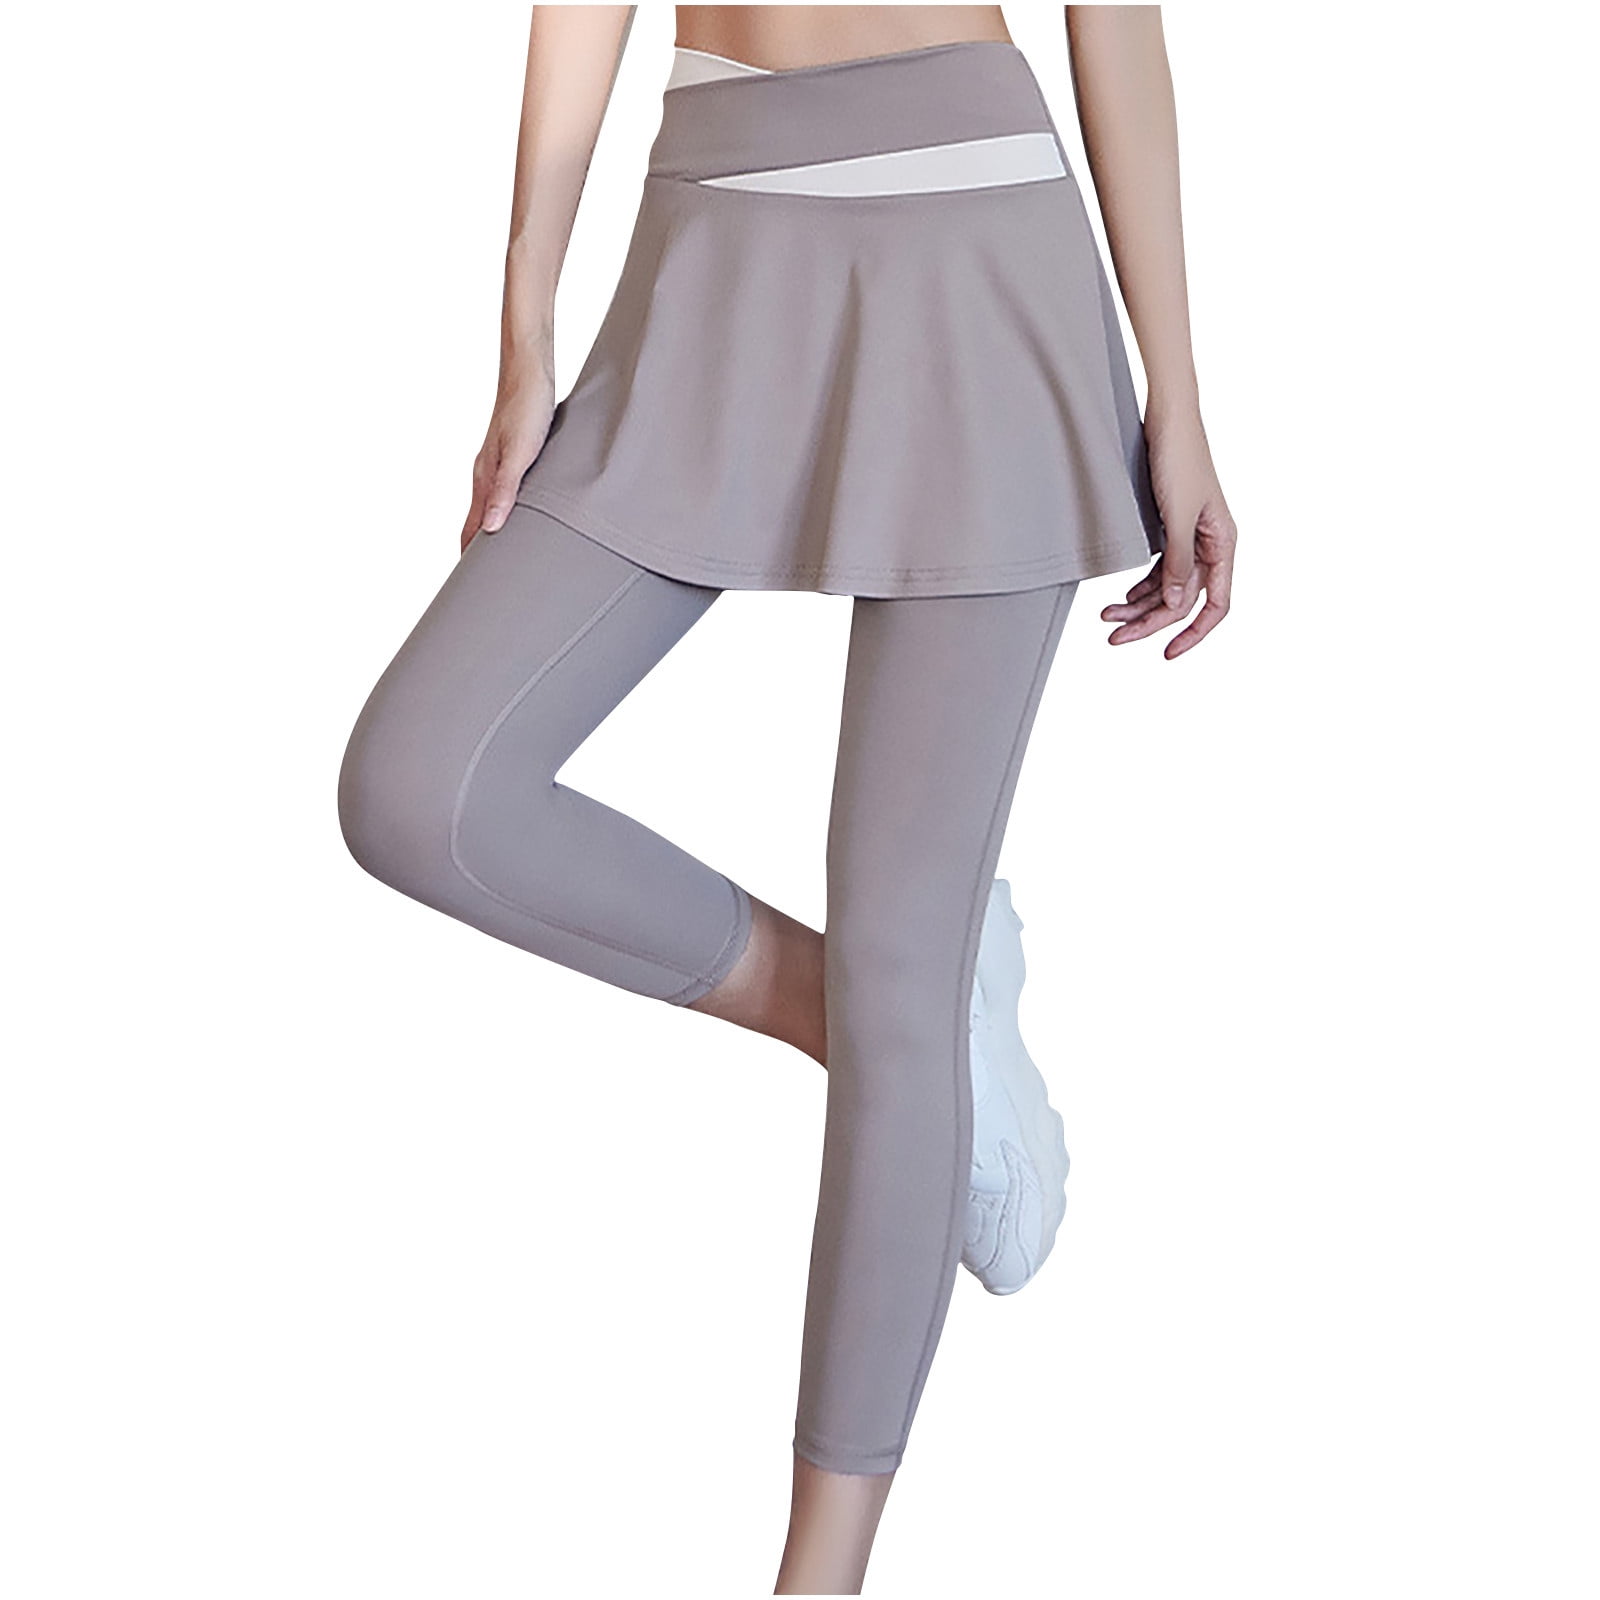 Cheap Women Fitness Tennis Skirted Workout Leggings Stretch Excise